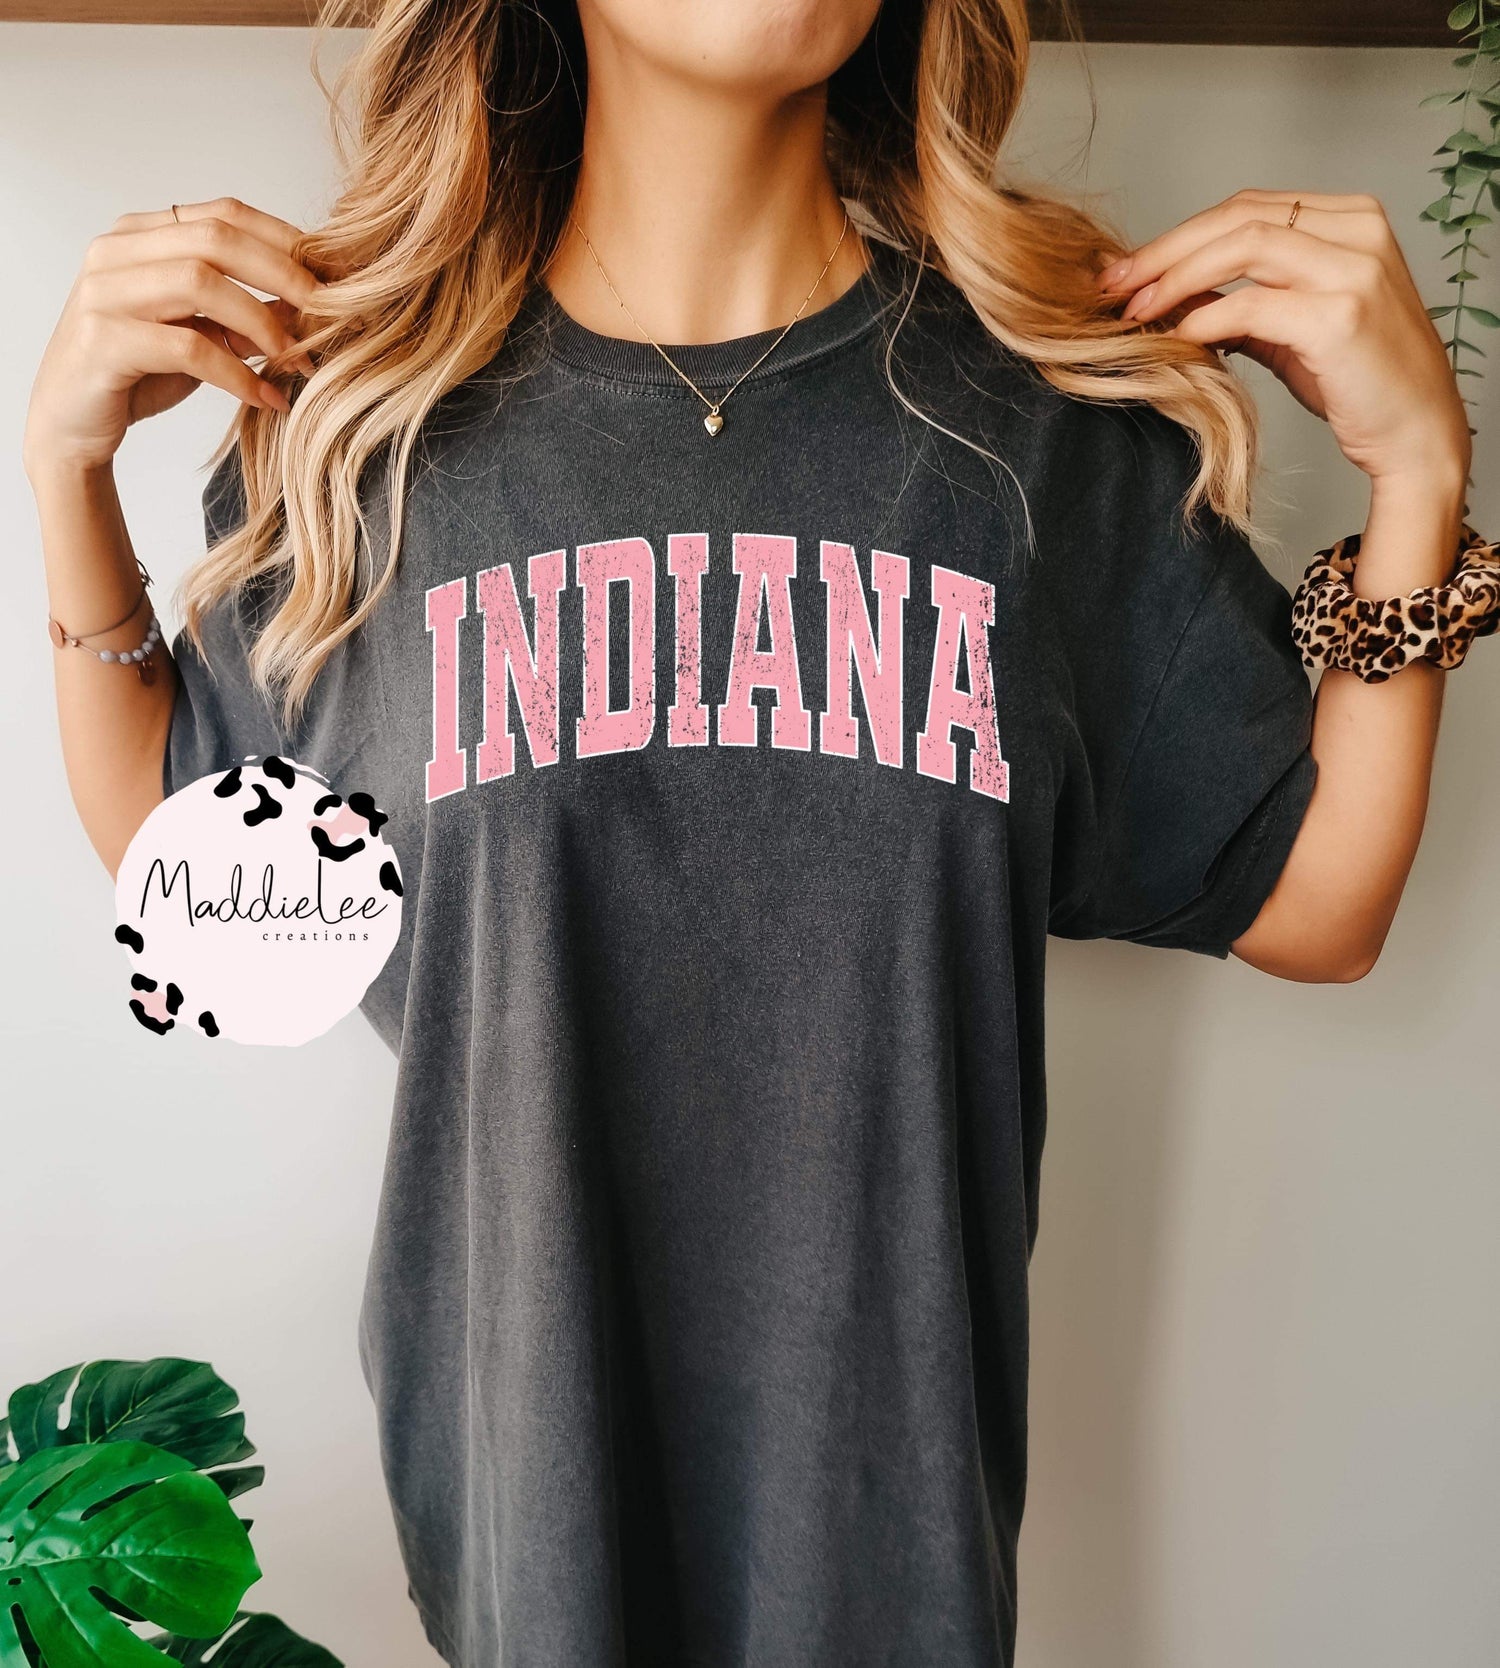 ALL THINGS INDIANA